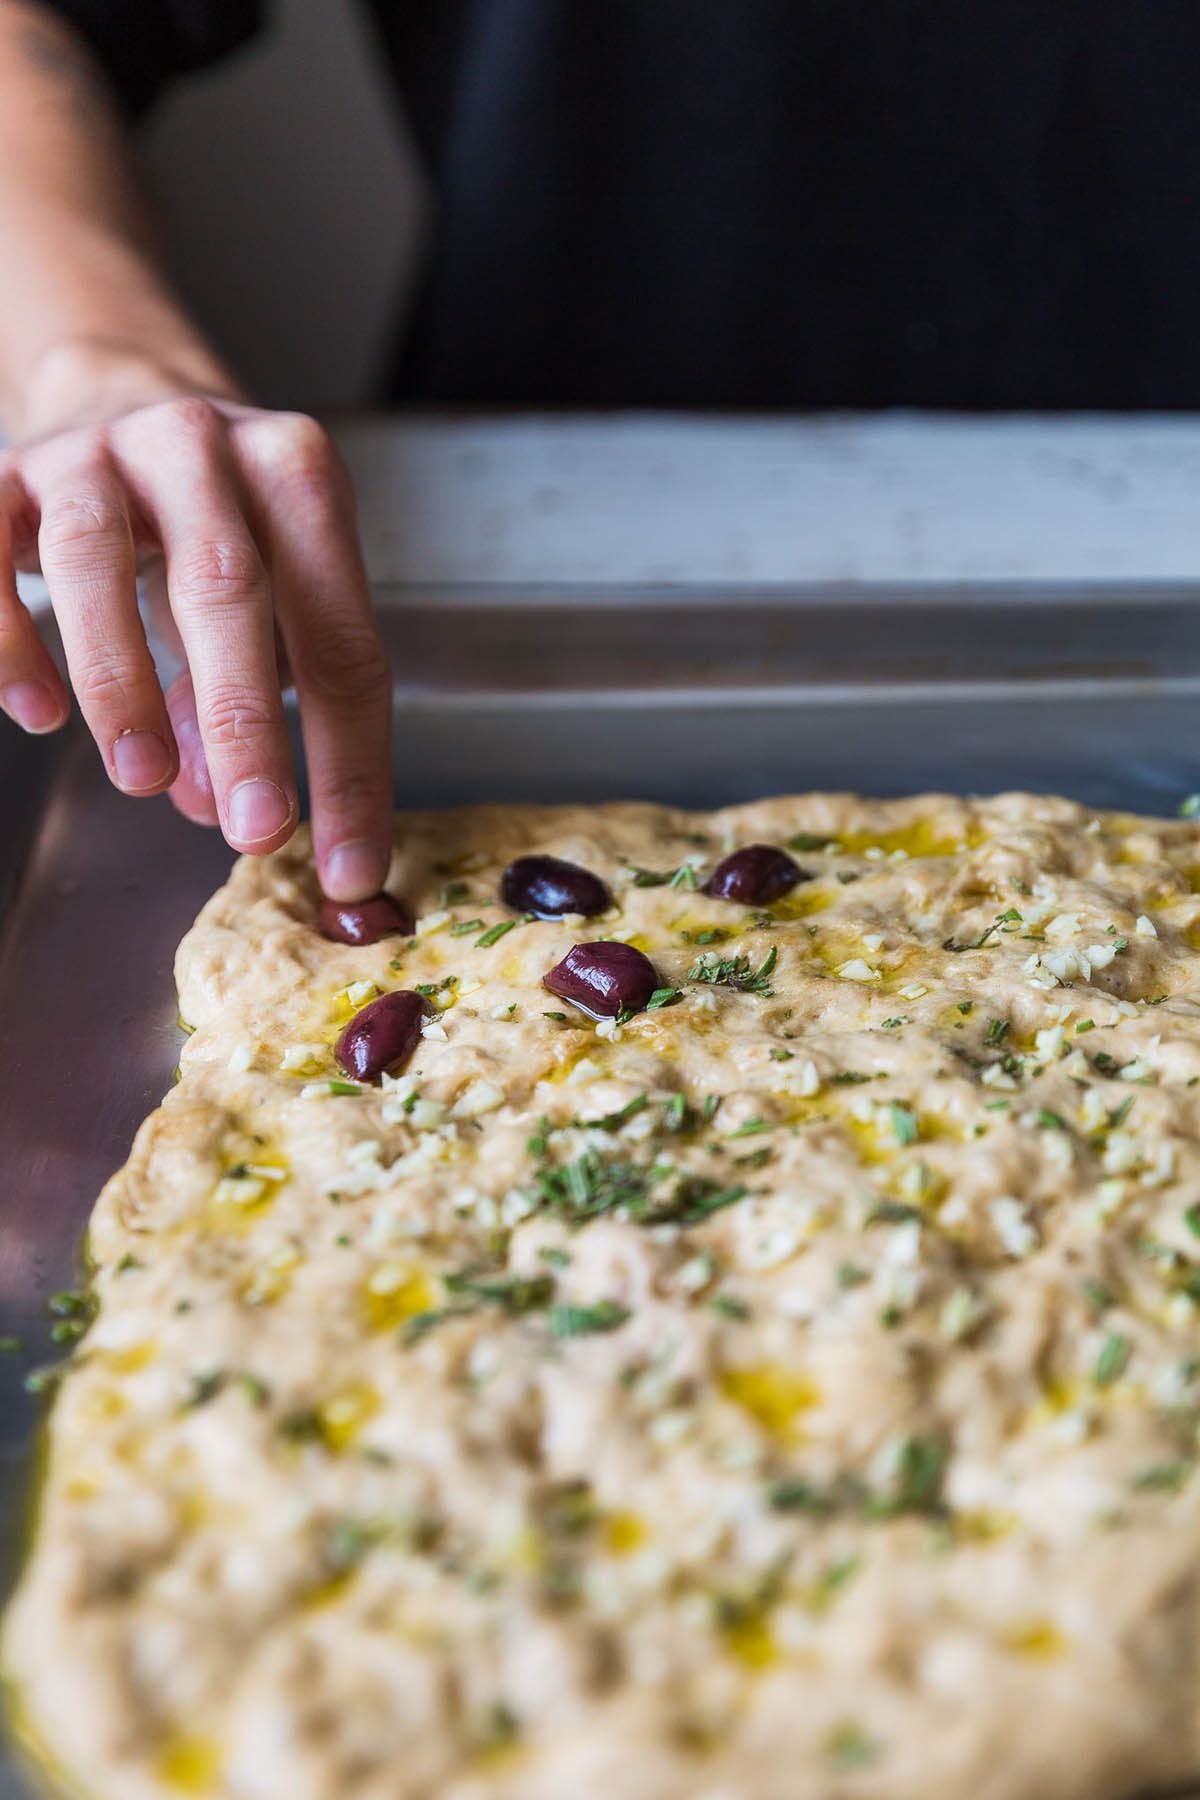 Woman's hand pressing olives into an unbaked focaccia.